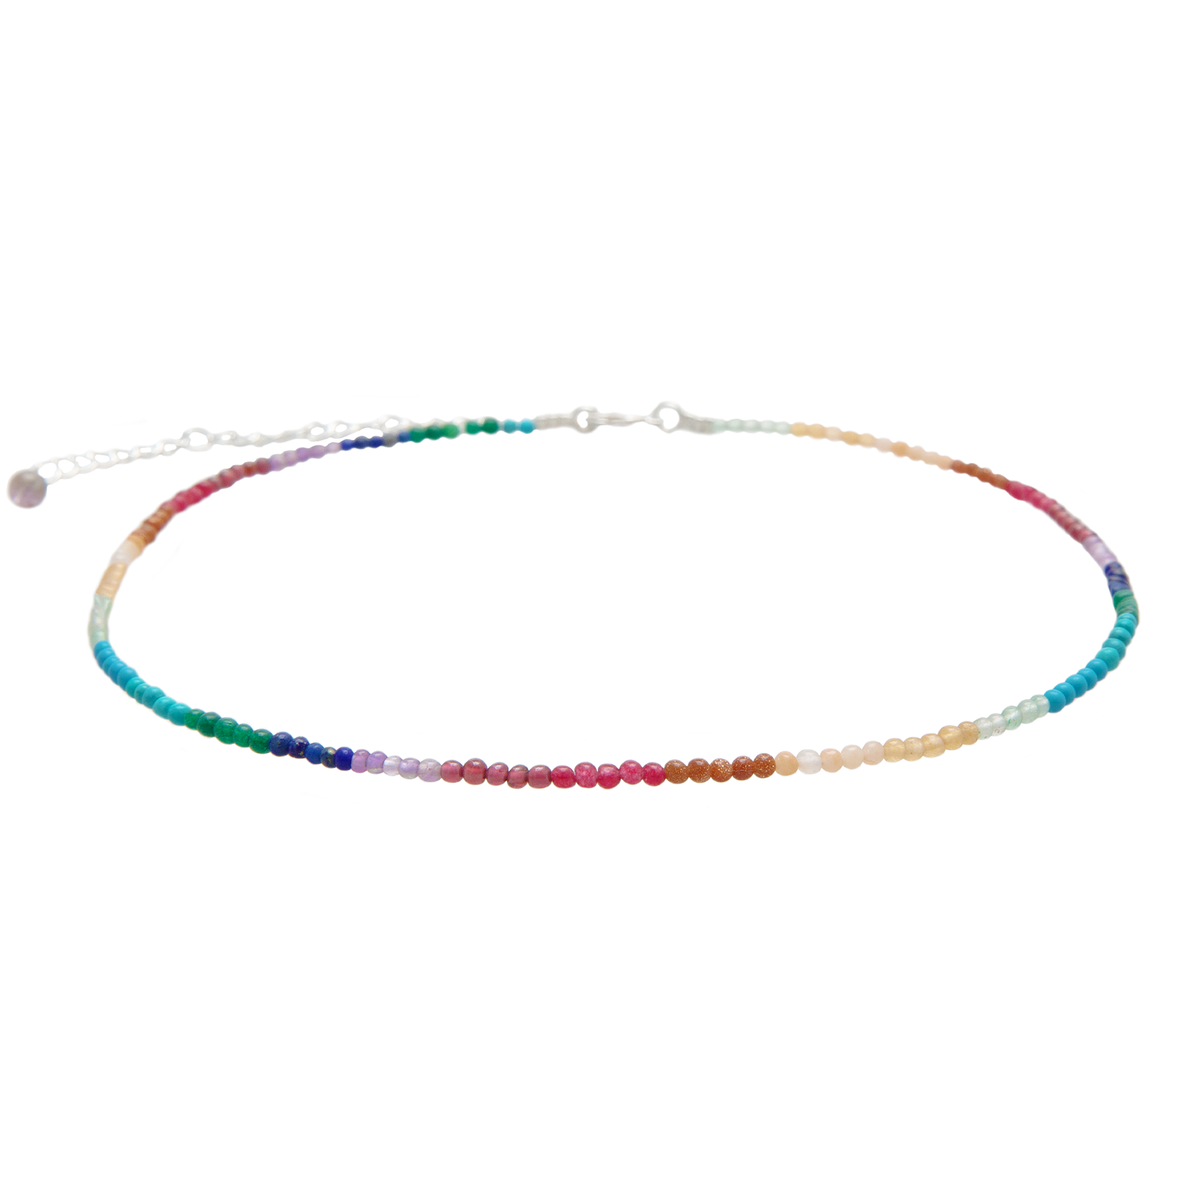 Rainbow beaded necklace with silver chain